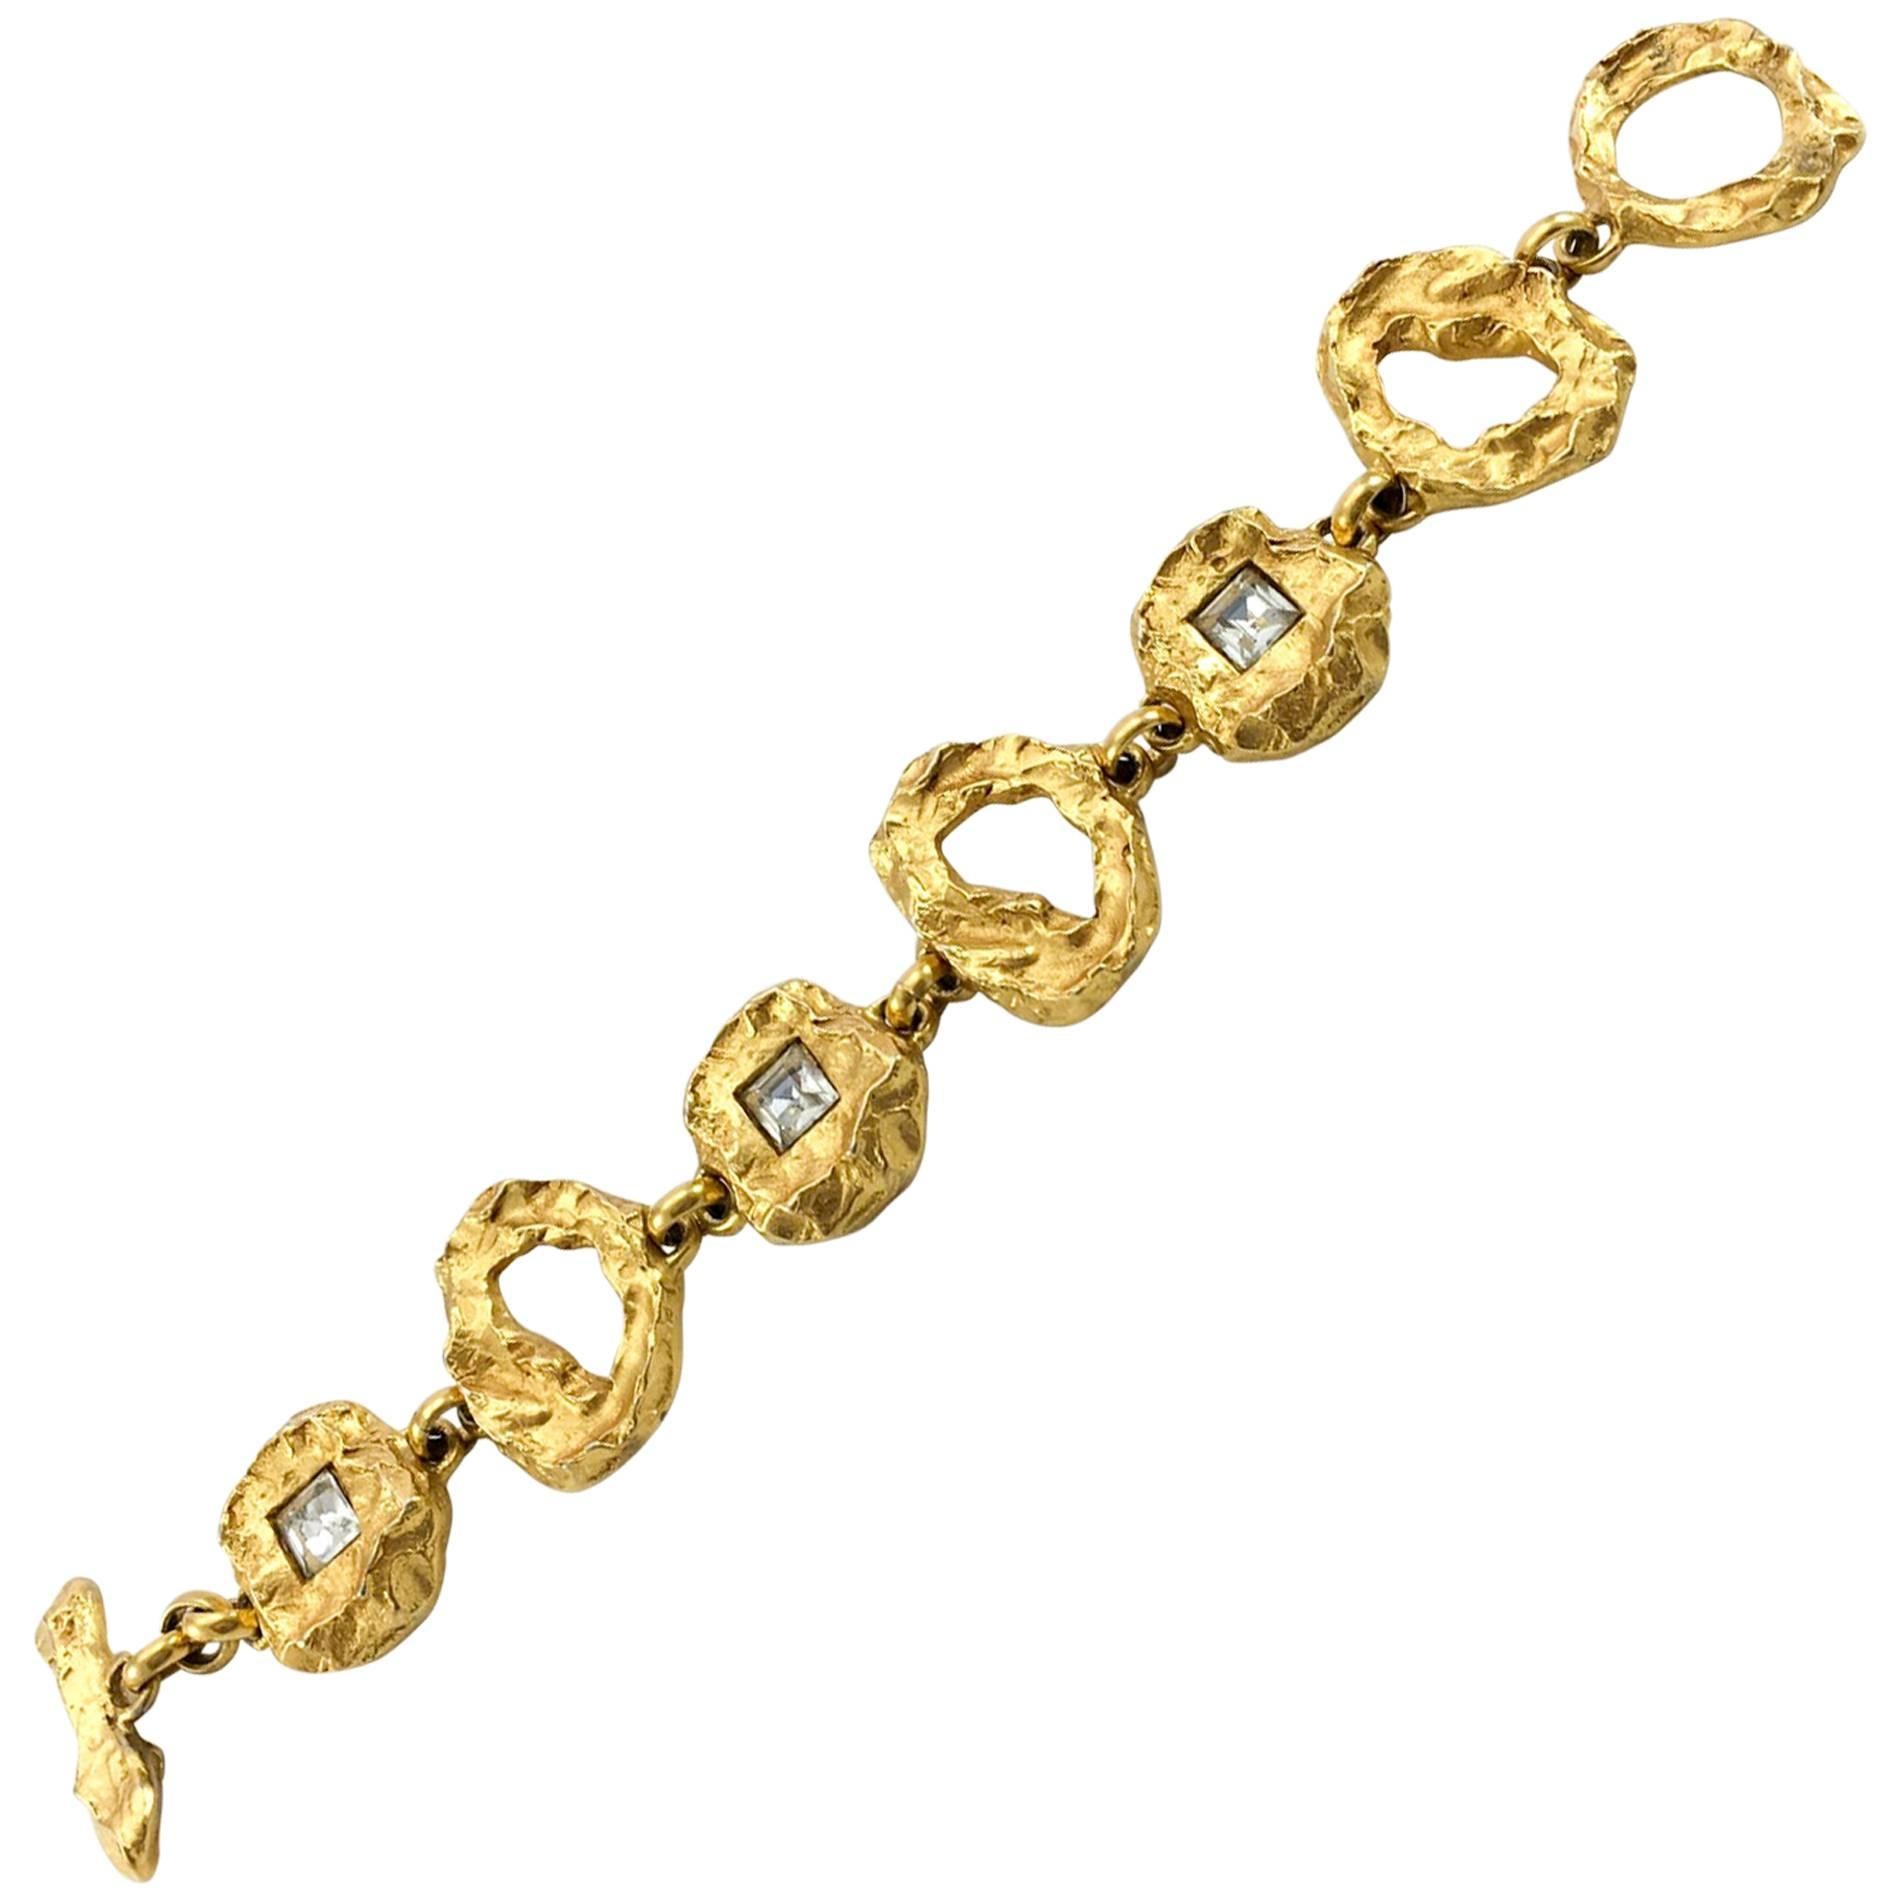 Lacroix Gold-Plated and Rhinestone Bracelet, by Goossens - 1980s